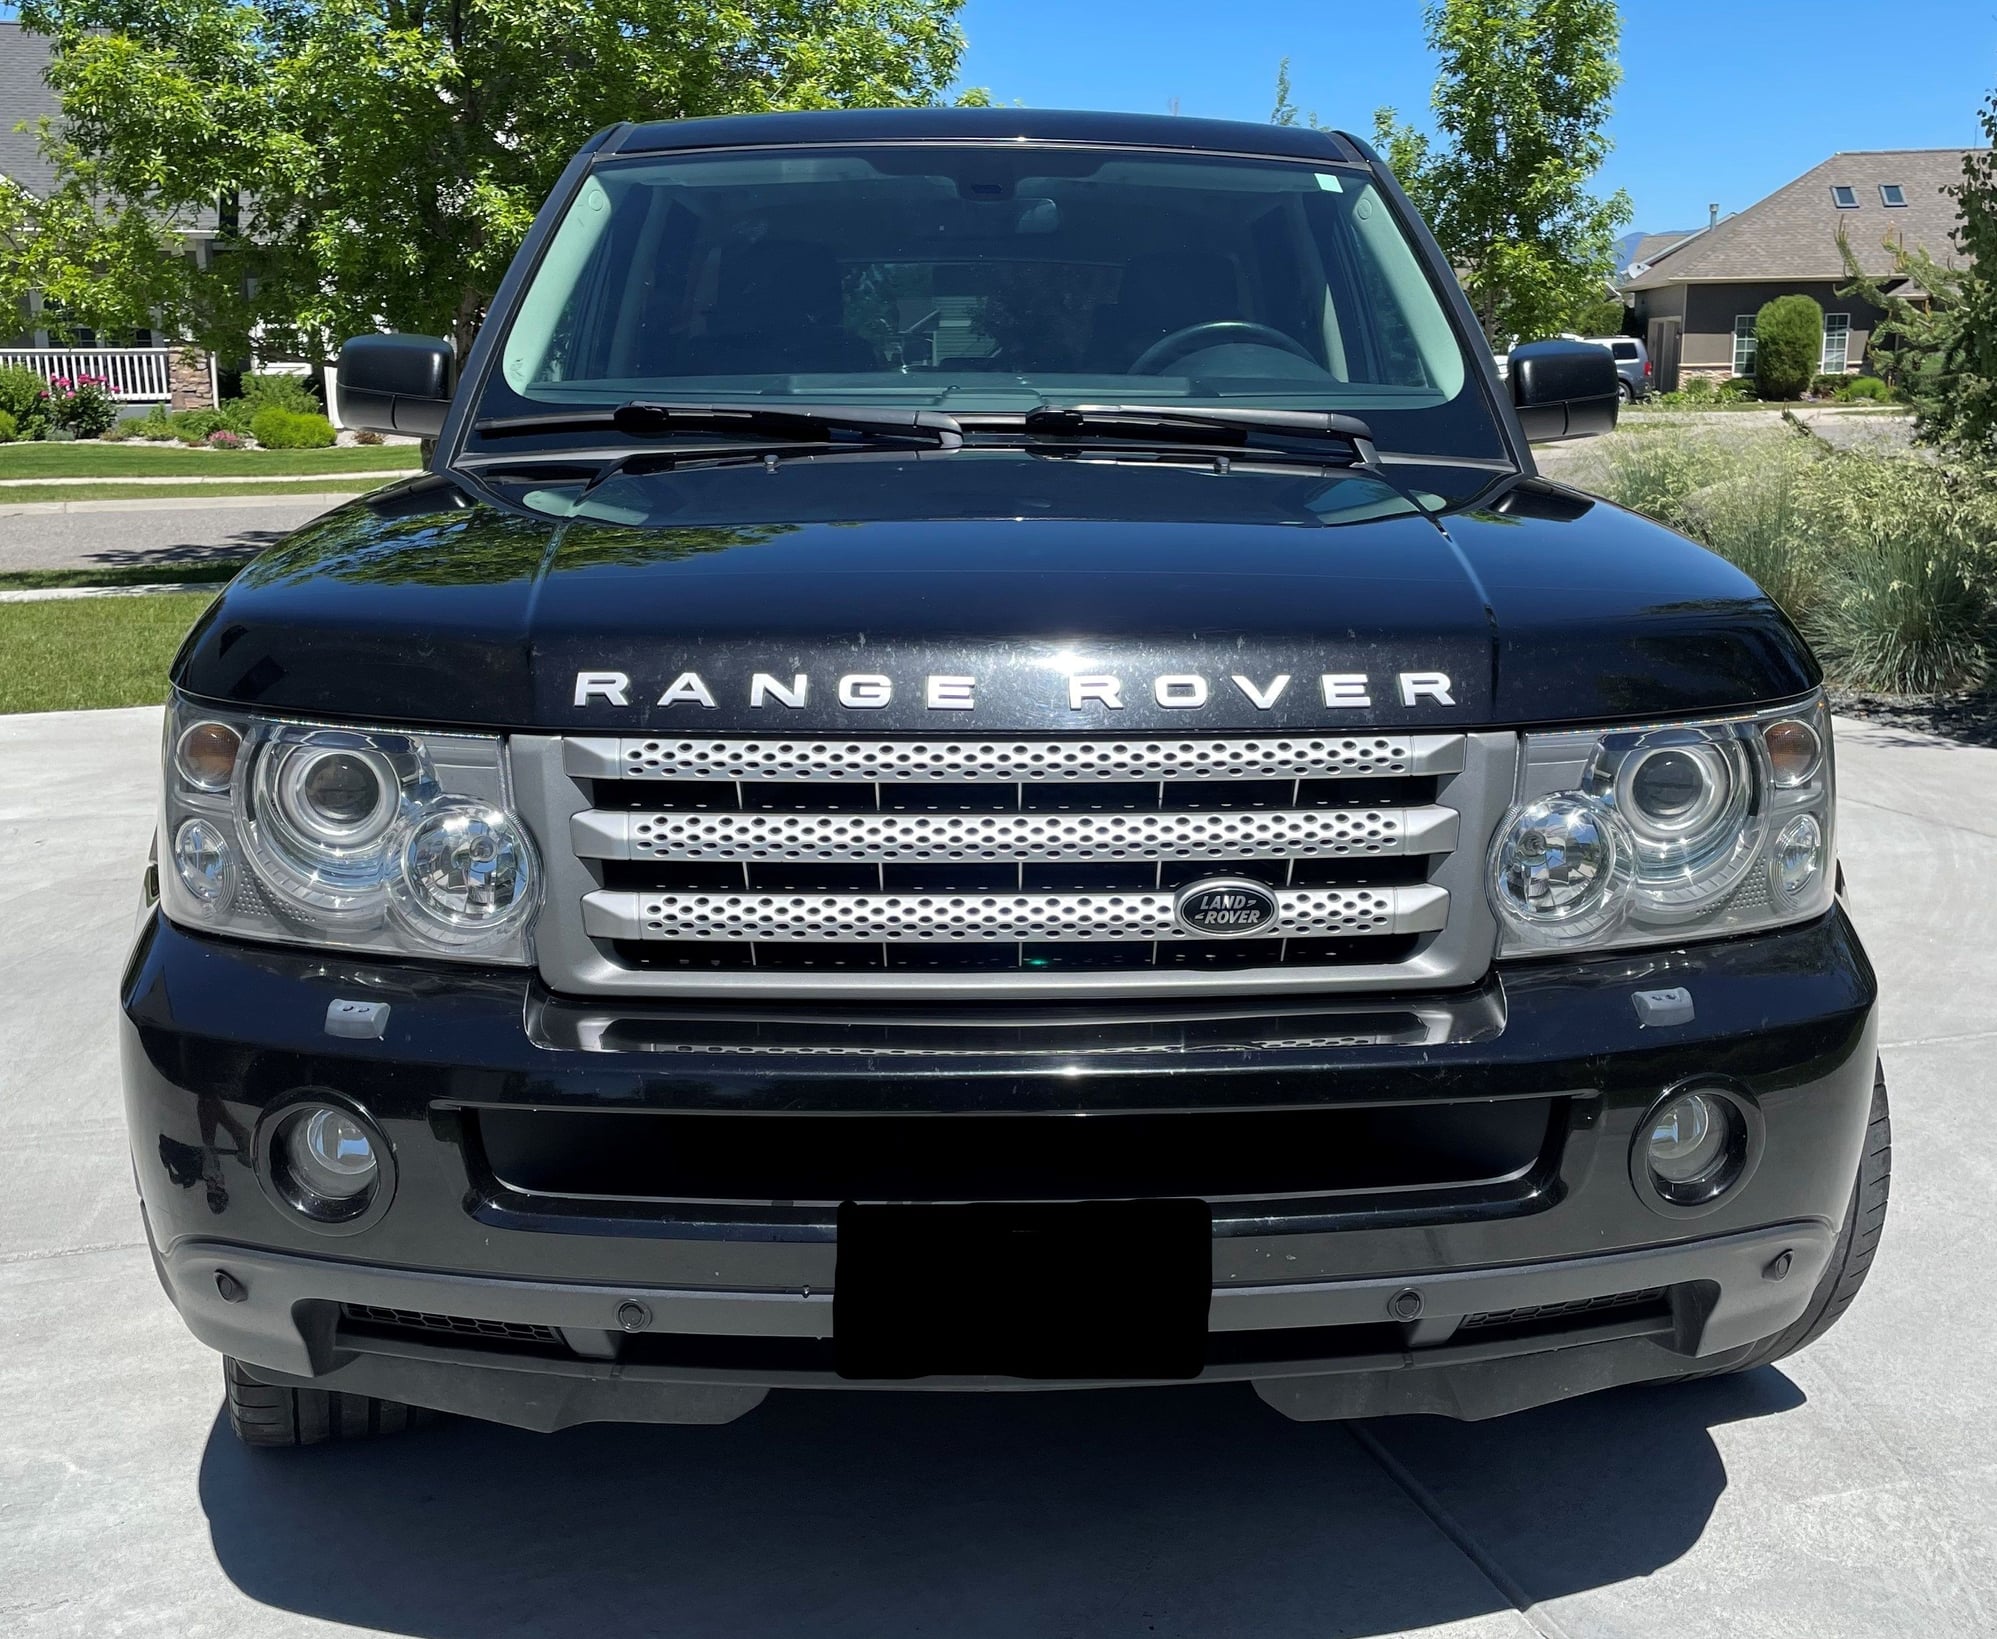 2008 Range Rover Sport Supercharged - Land Rover Forums - Land Rover ...